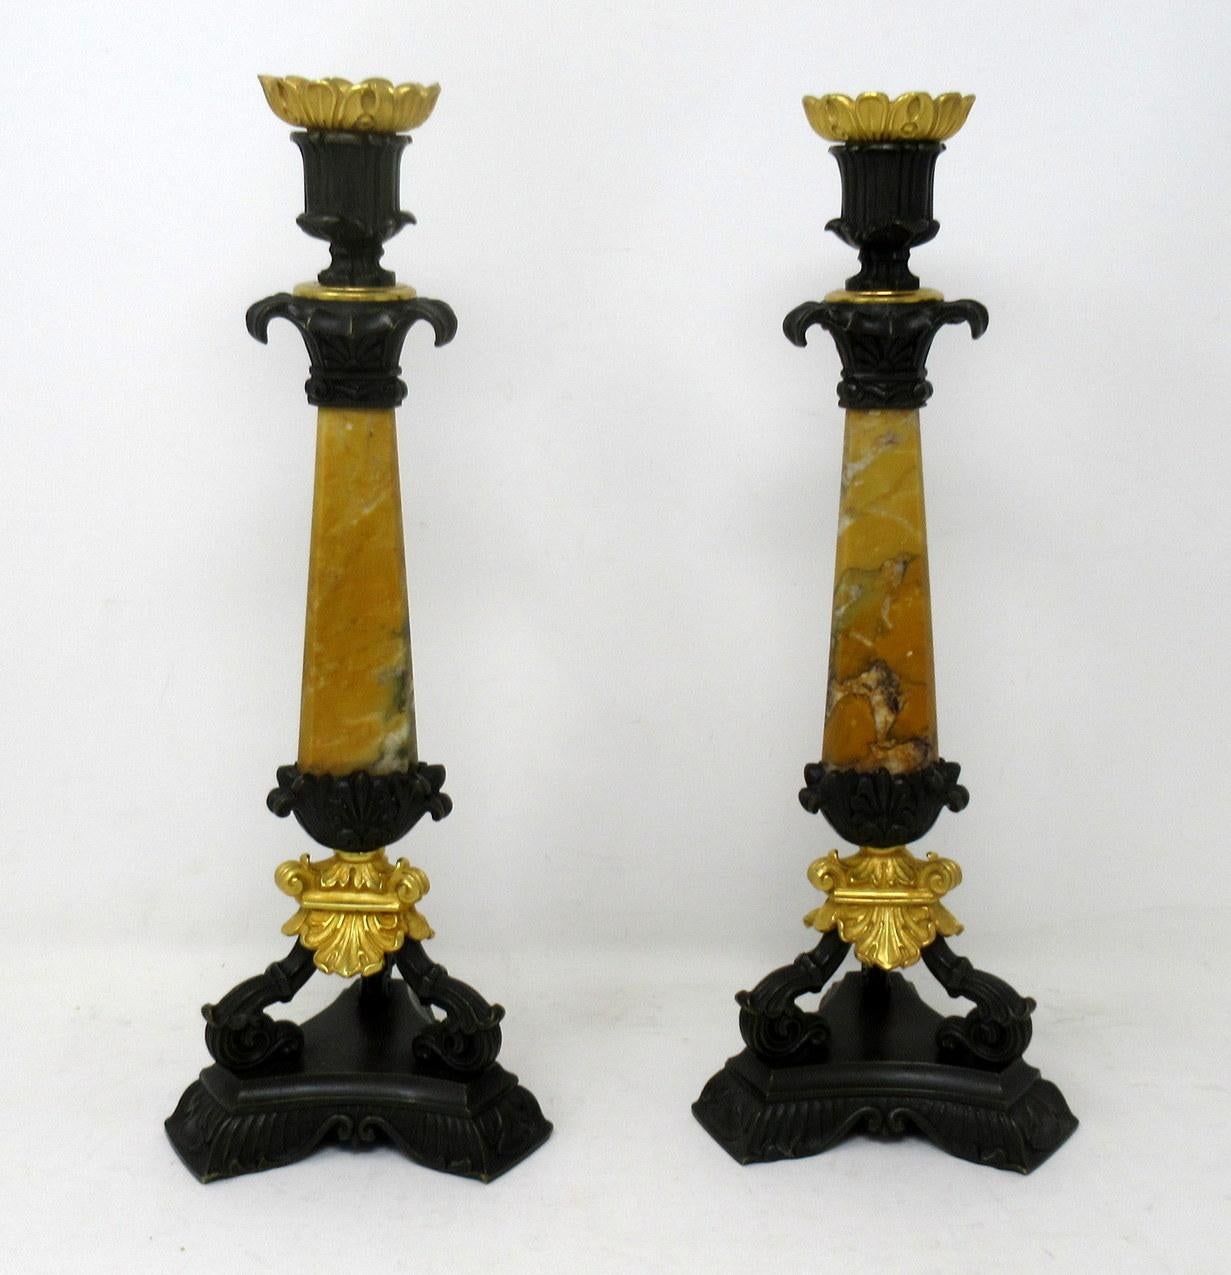 A very fine pair of French bronze & well grained sienna marble grand tour single light table or mantle candlesticks of unusually tall proportions, outstanding workmanship quality with good heavy gauge chisel cast mounts throughout, first quarter of